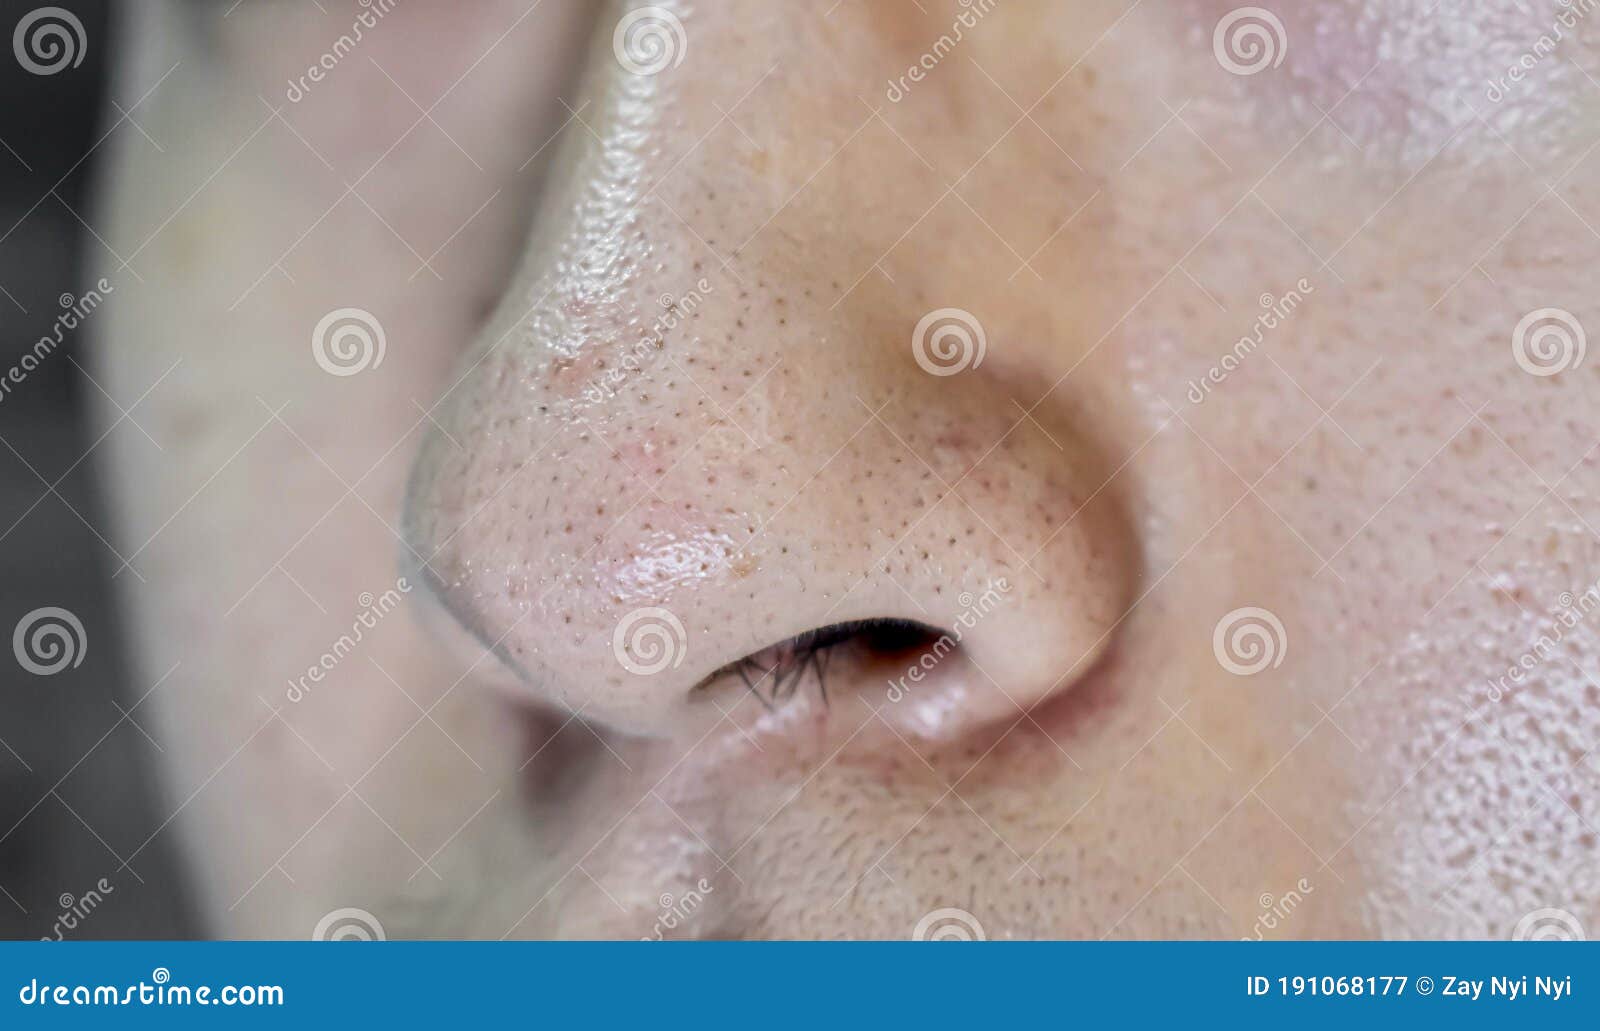 Blackheads or Black Heads on Nose of Asian Man Stock Image - Image of male,  dark: 191068177